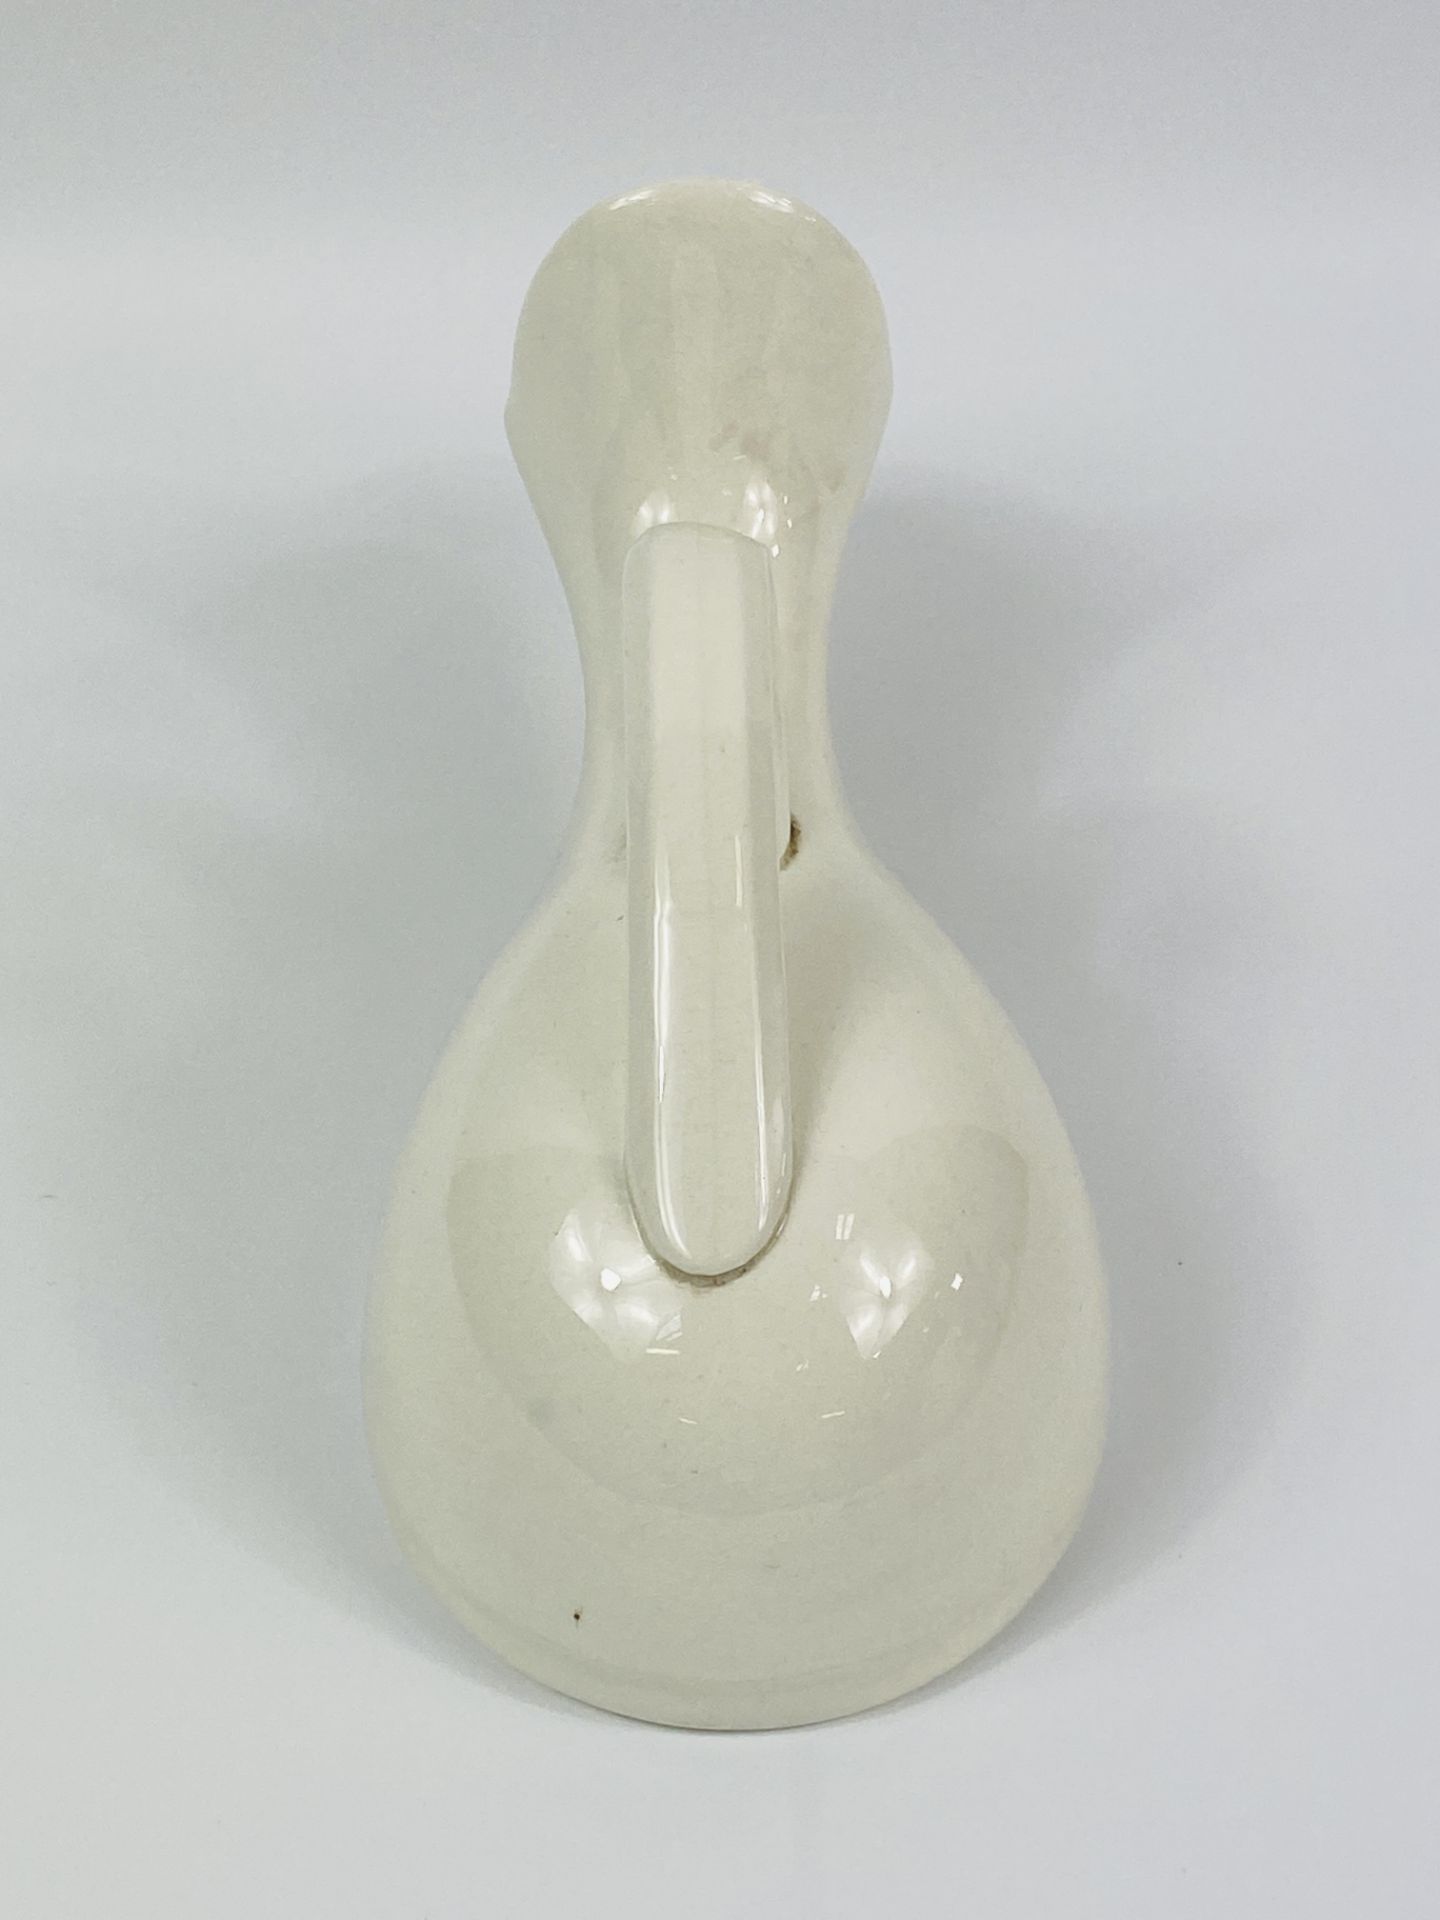 Slipper bedpan and a ceramic bed bottle - Image 5 of 6